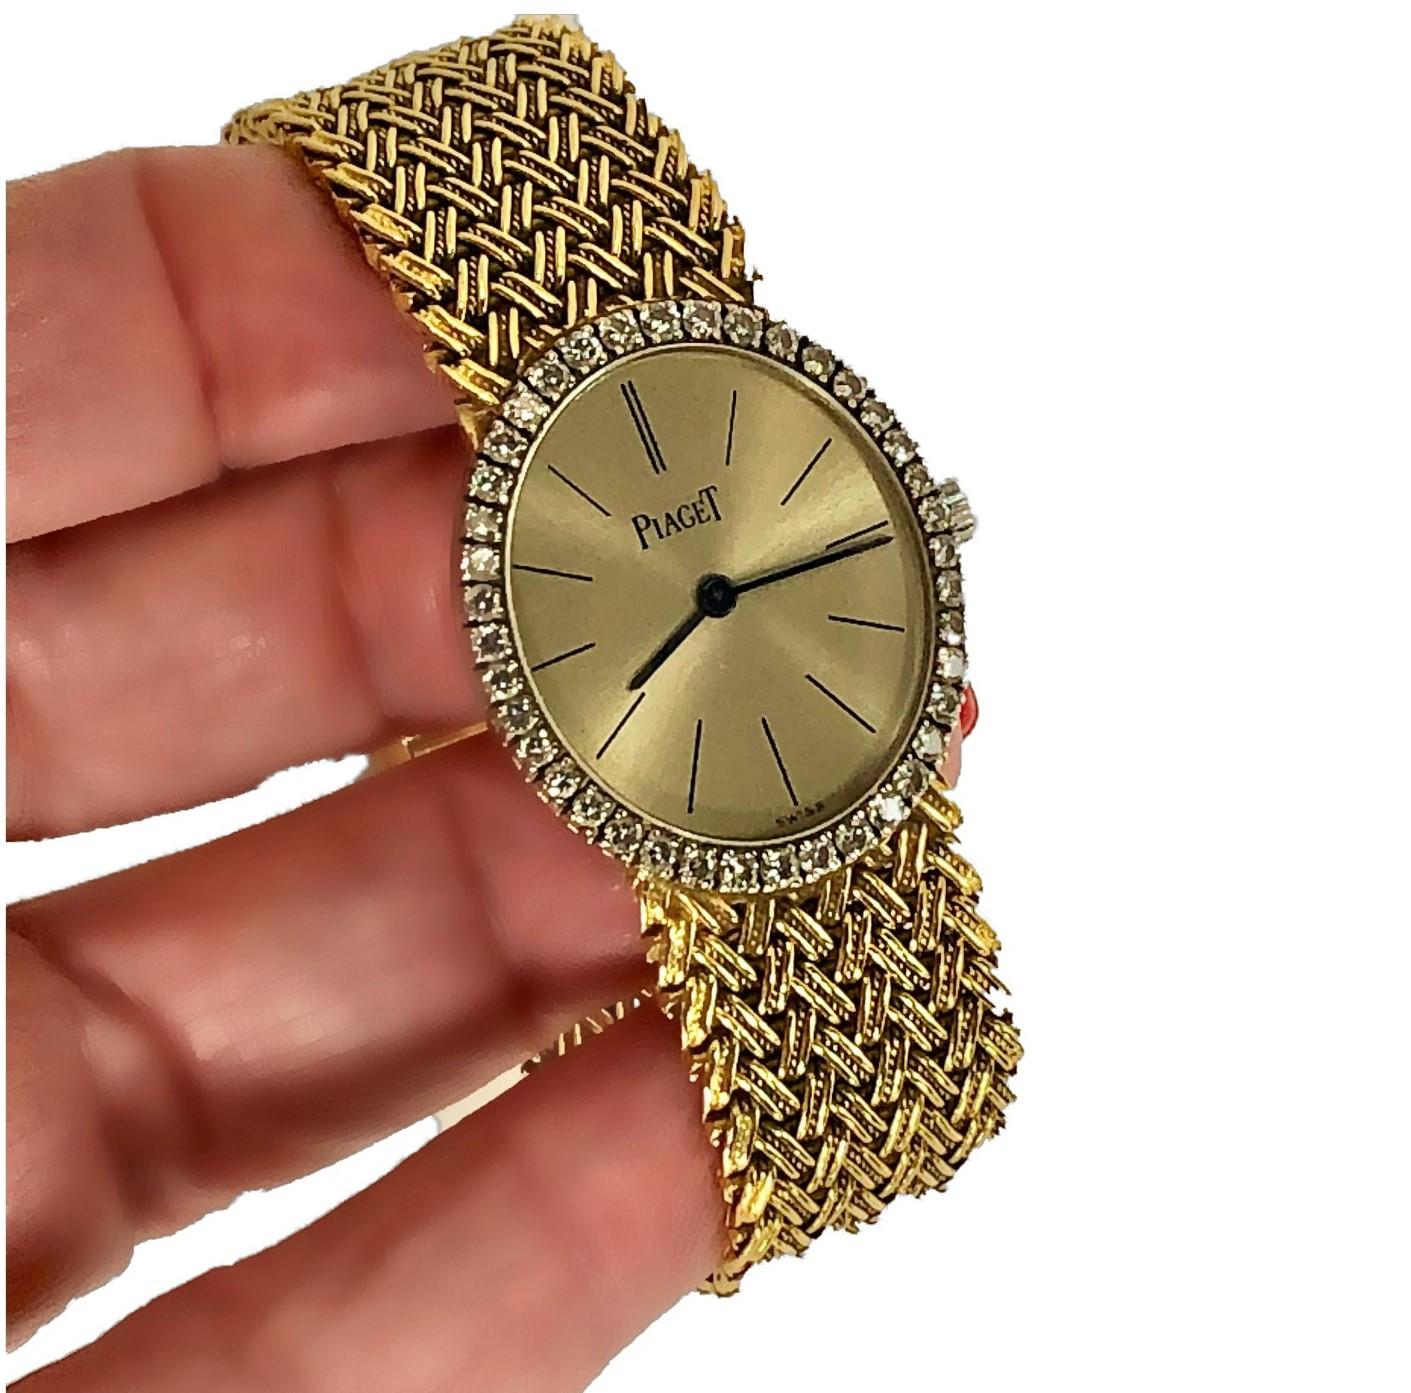 Piaget Ladies Classic Vertical Oval Yellow Gold Watch with Diamond Bezel 3